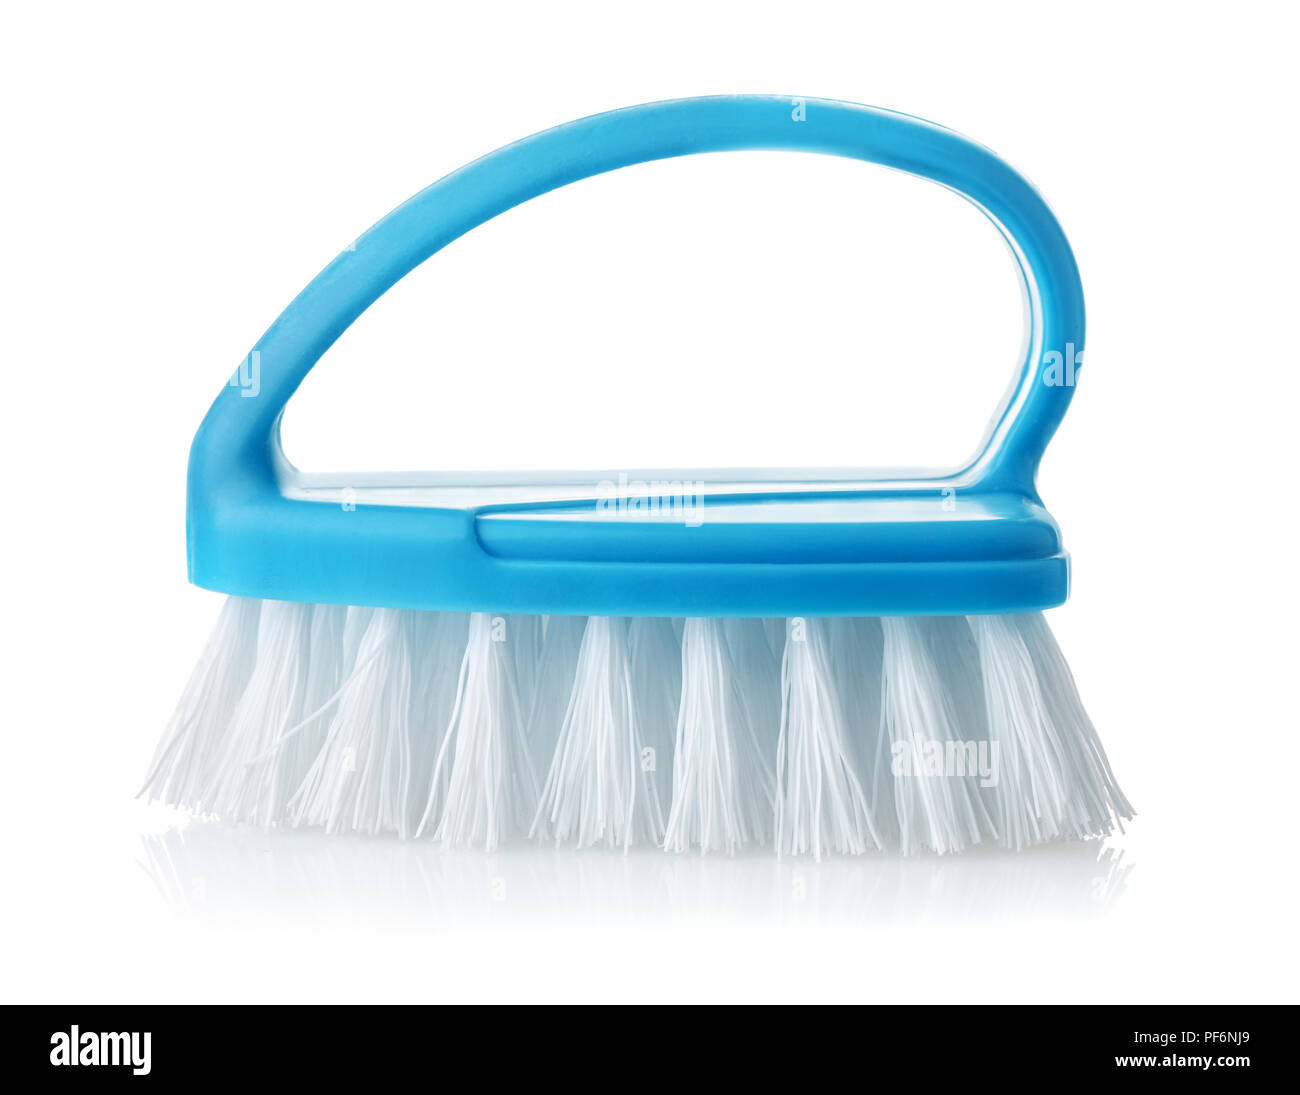 Side view of blue cleaning brush isolated on white Stock Photo